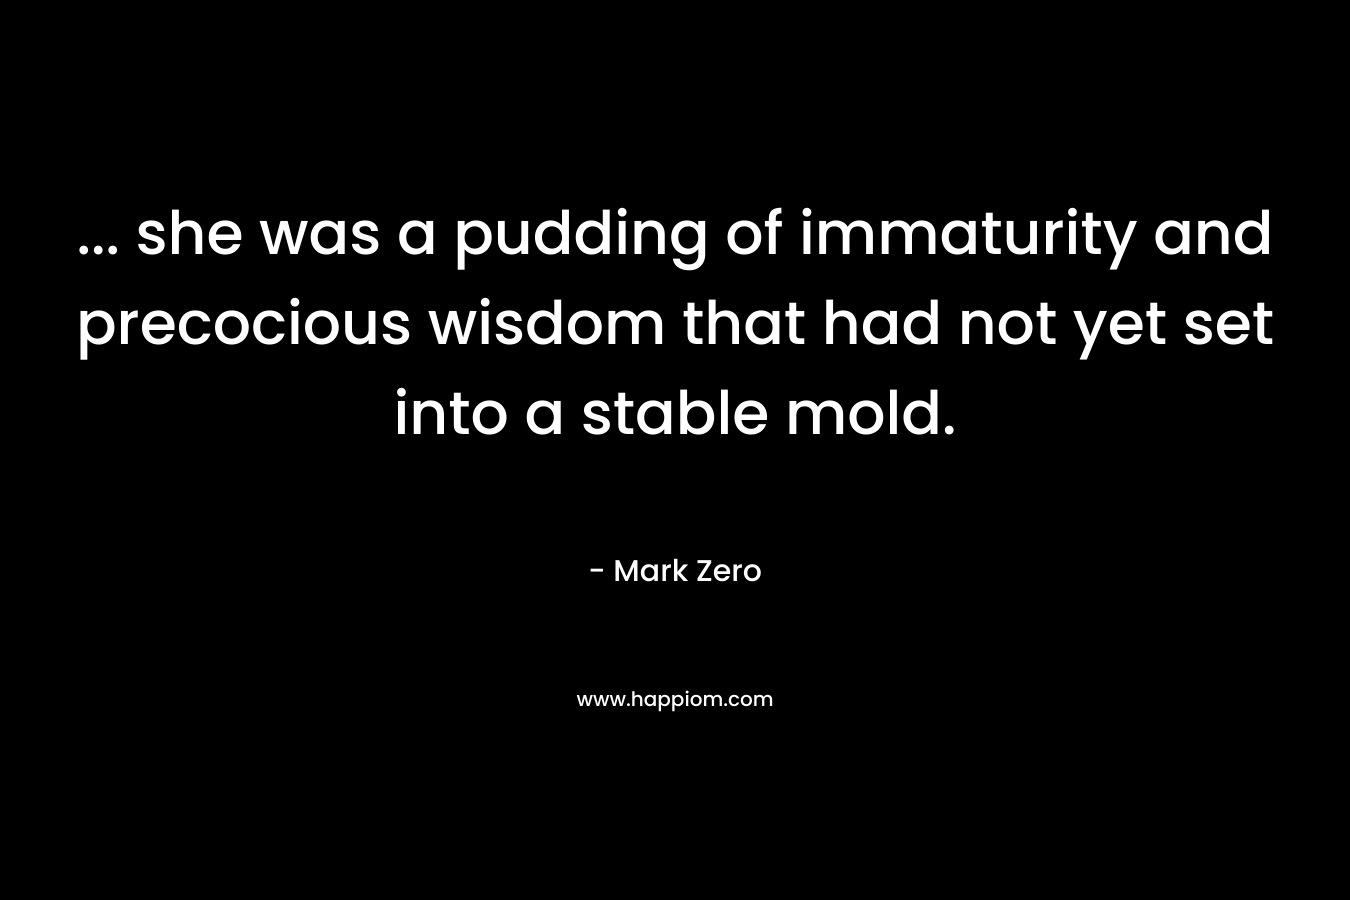 … she was a pudding of immaturity and precocious wisdom that had not yet set into a stable mold. – Mark Zero